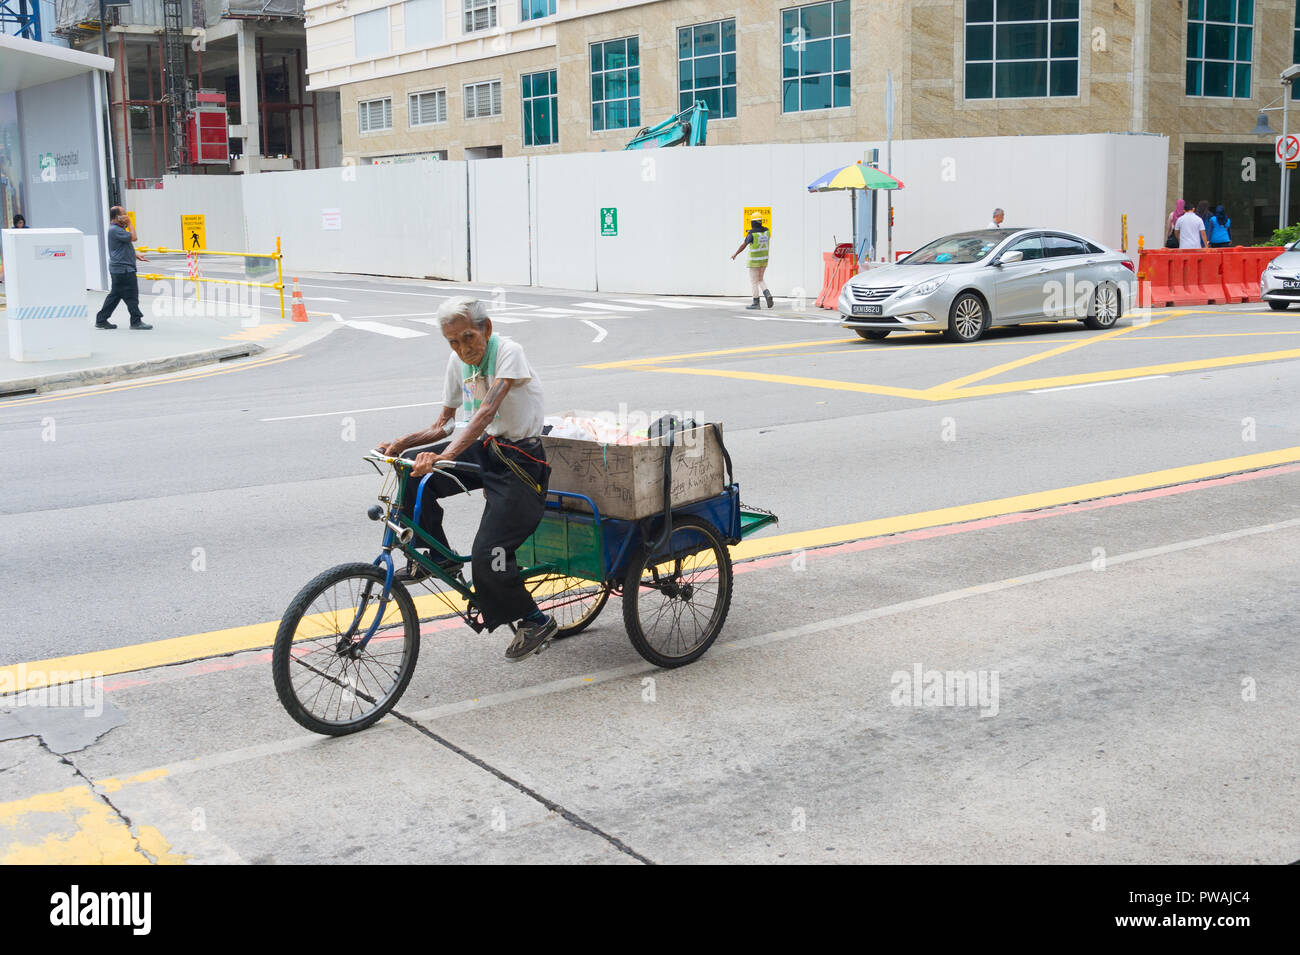 SINGAPORE - FEBRUARY 18, 2017: Man riding a tricycle on the road in Singapore. Singapore is the major financial center in Asia Stock Photo